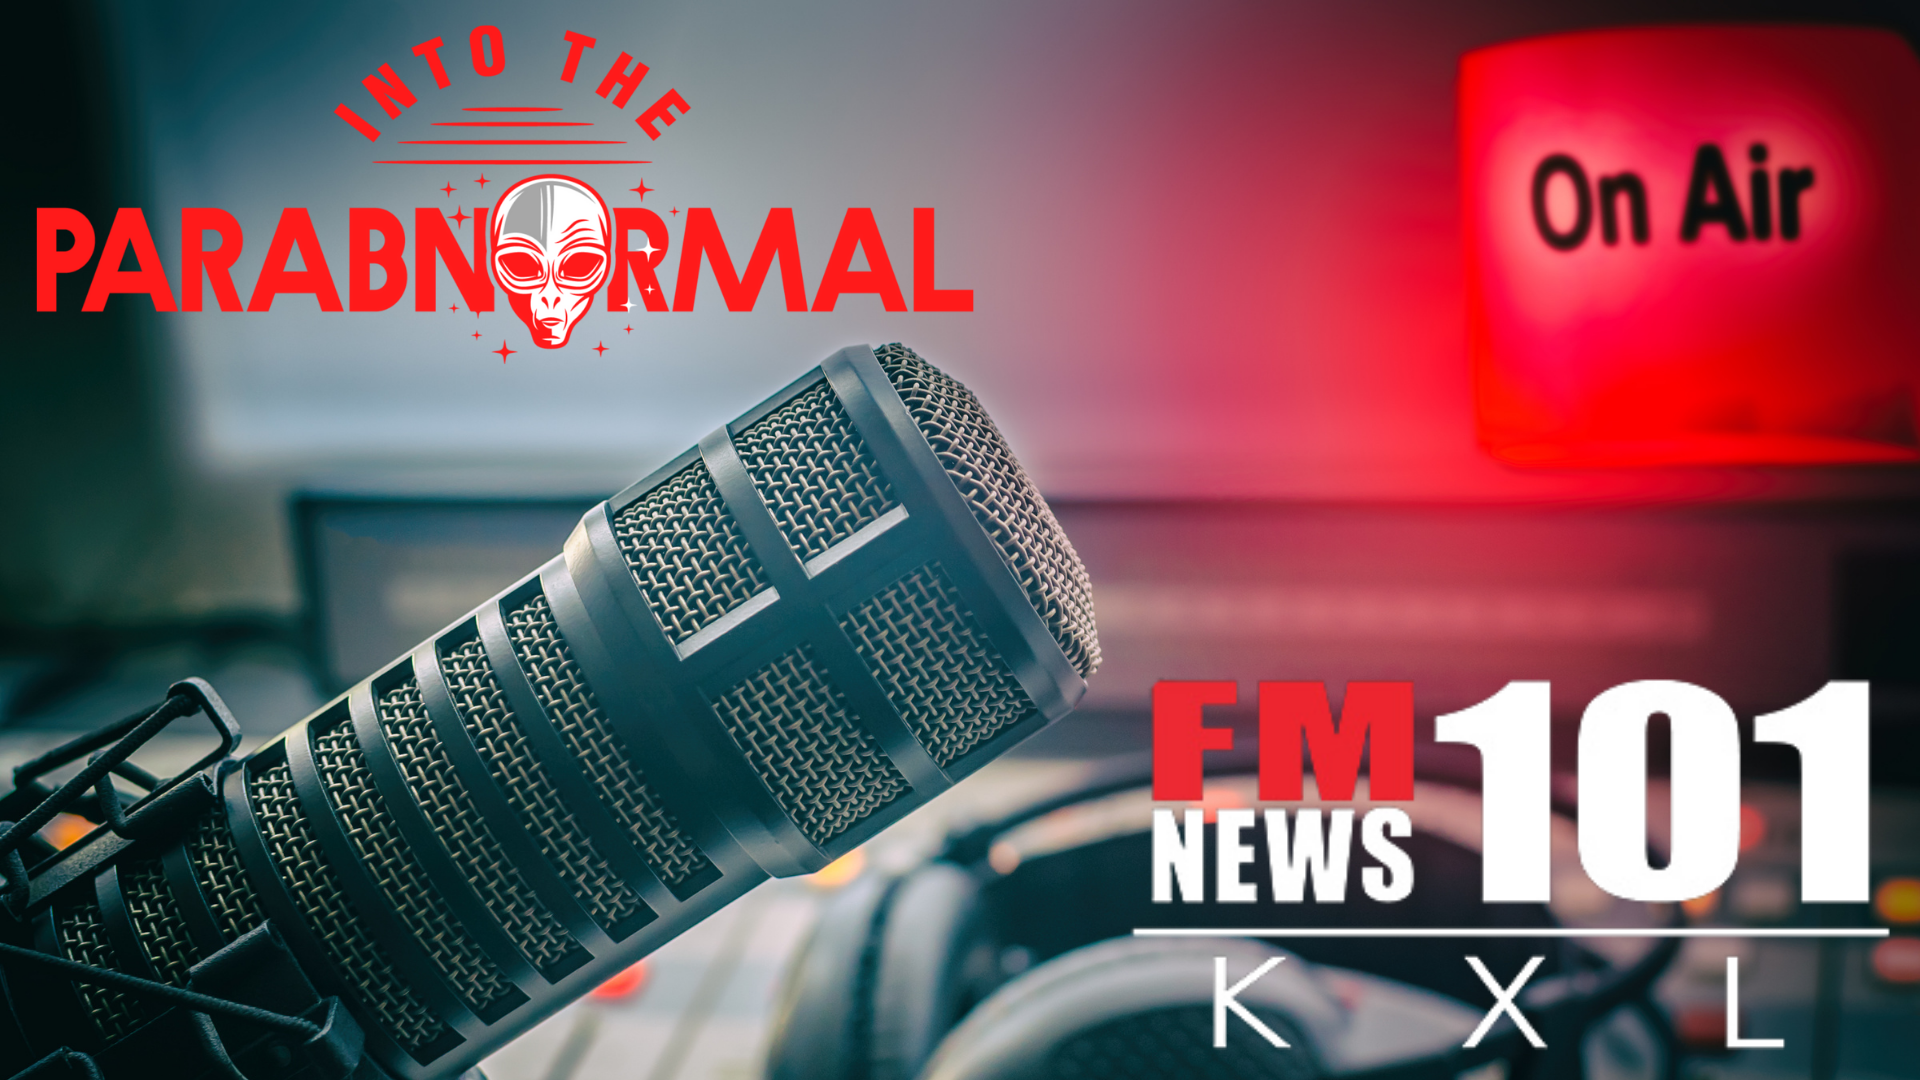 Thumbnail for The Mothership Has Landed: FM News 101 KXL Adds “Into The Parabnormal”